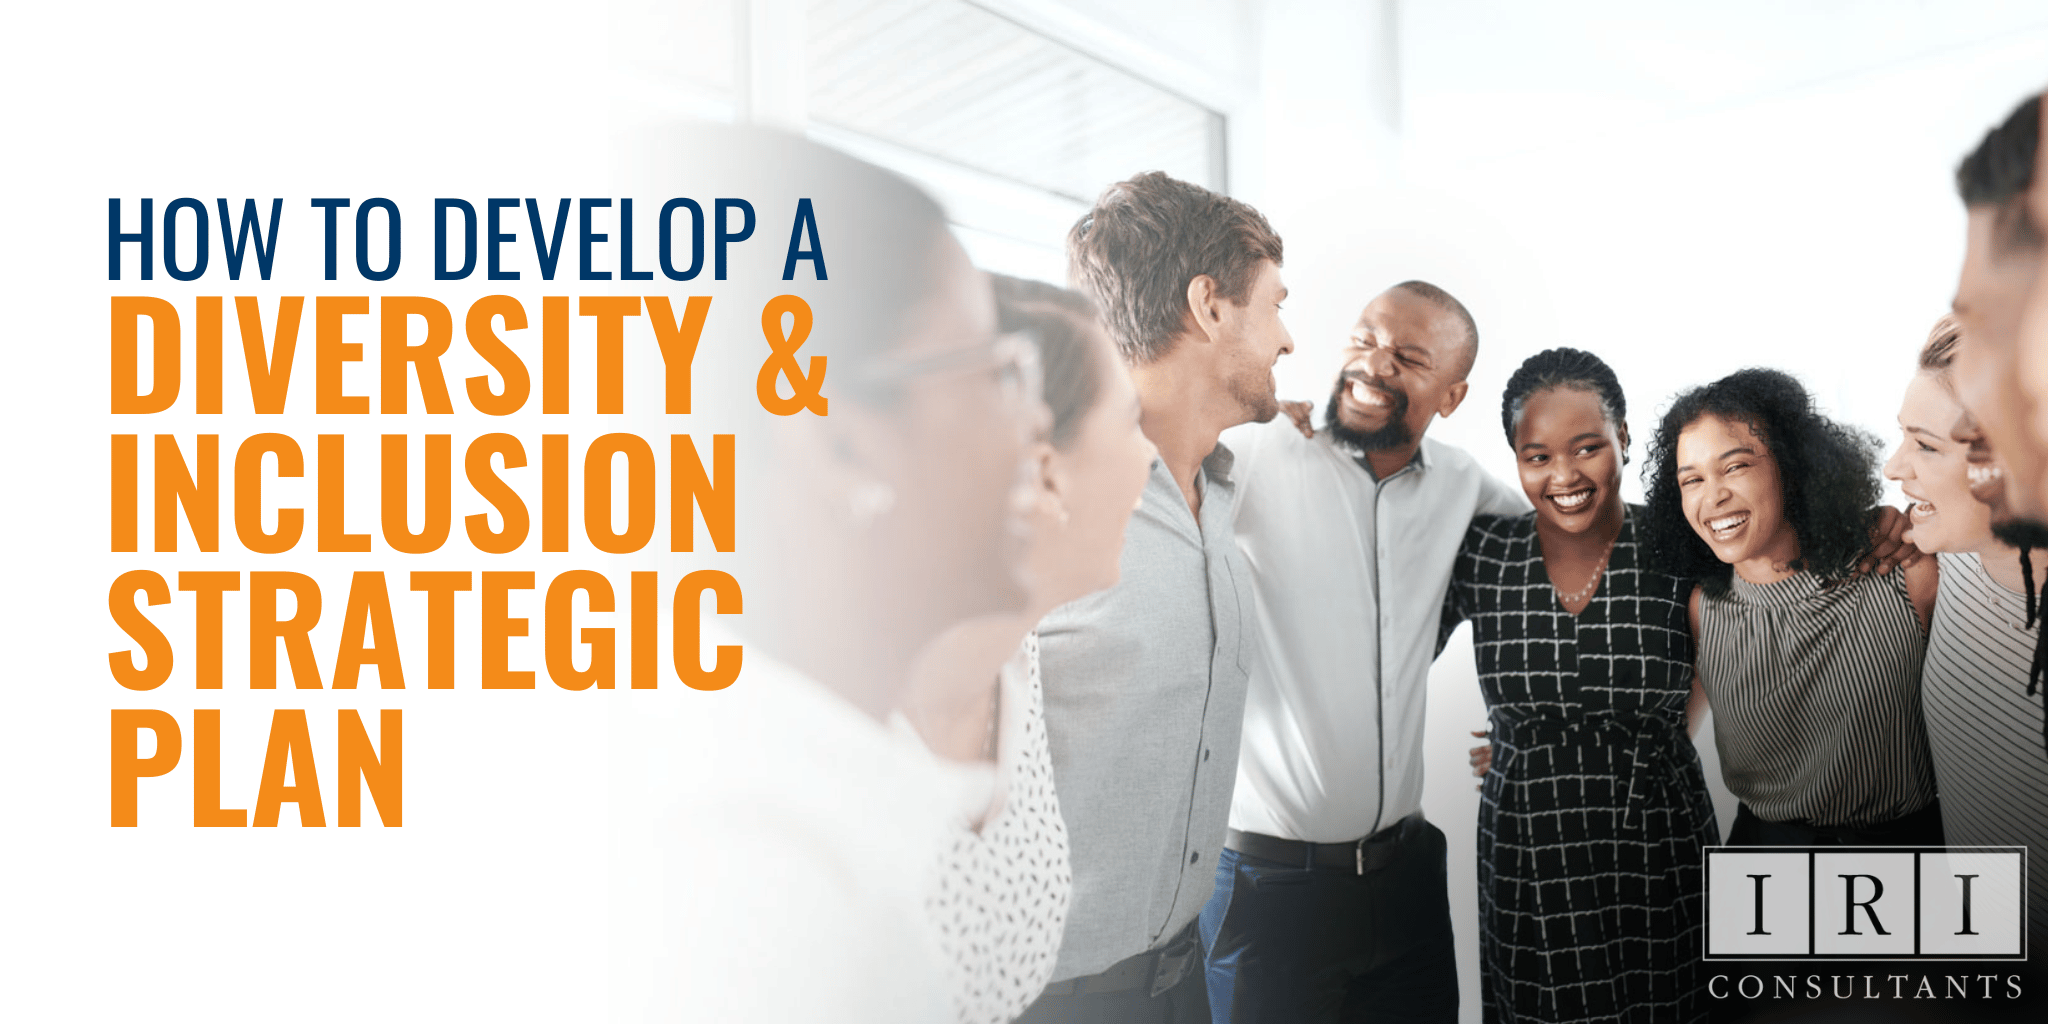 How to Develop a Diversity & Inclusion Strategic Plan